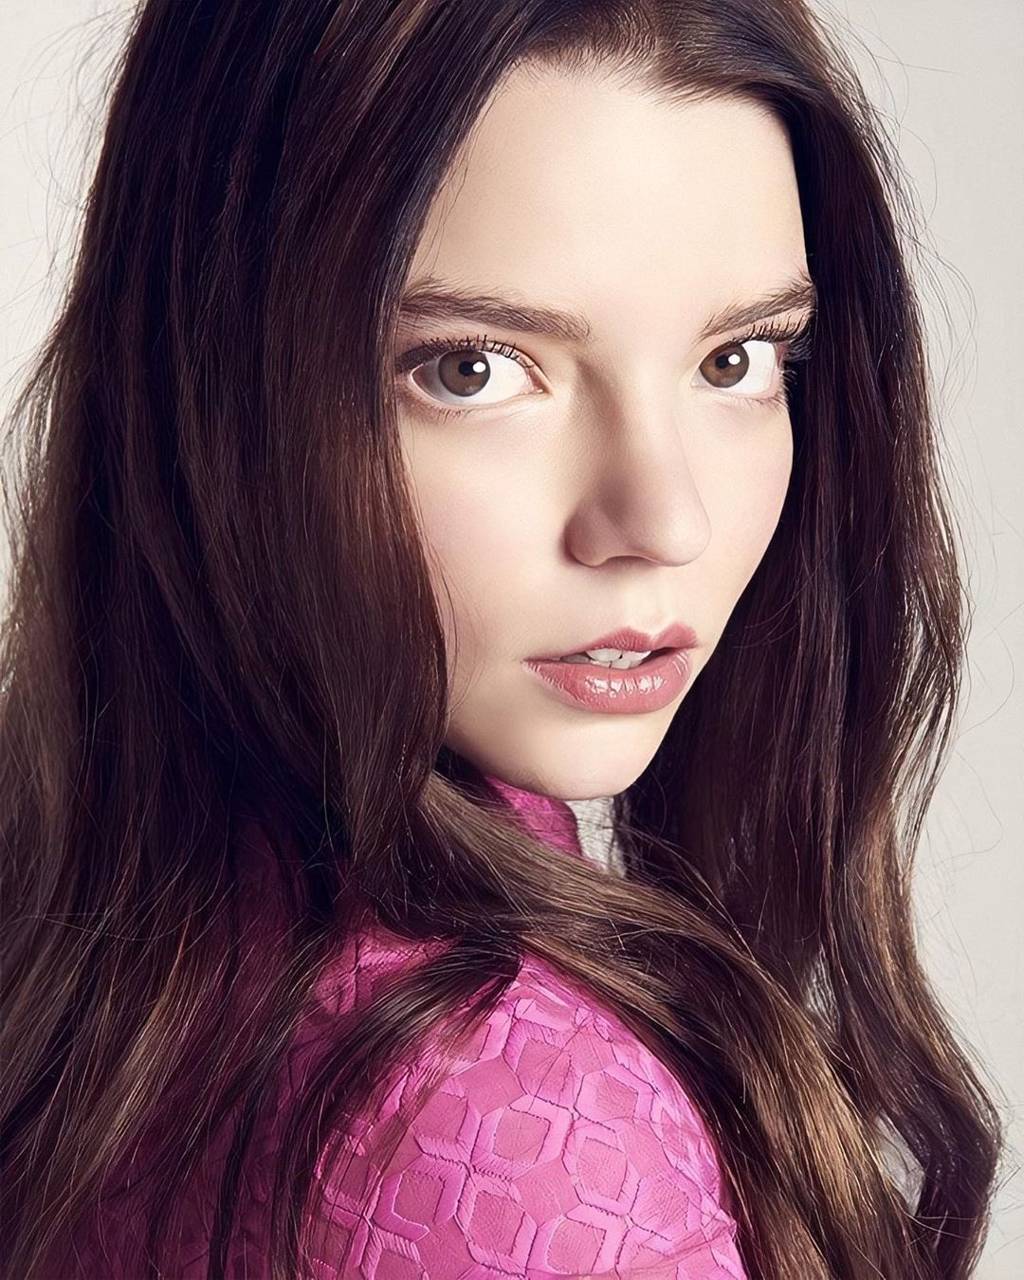 The young Ukrainian model Vlada Hargreeves, who has become the new face of the luxury brand. - Anya Taylor-Joy